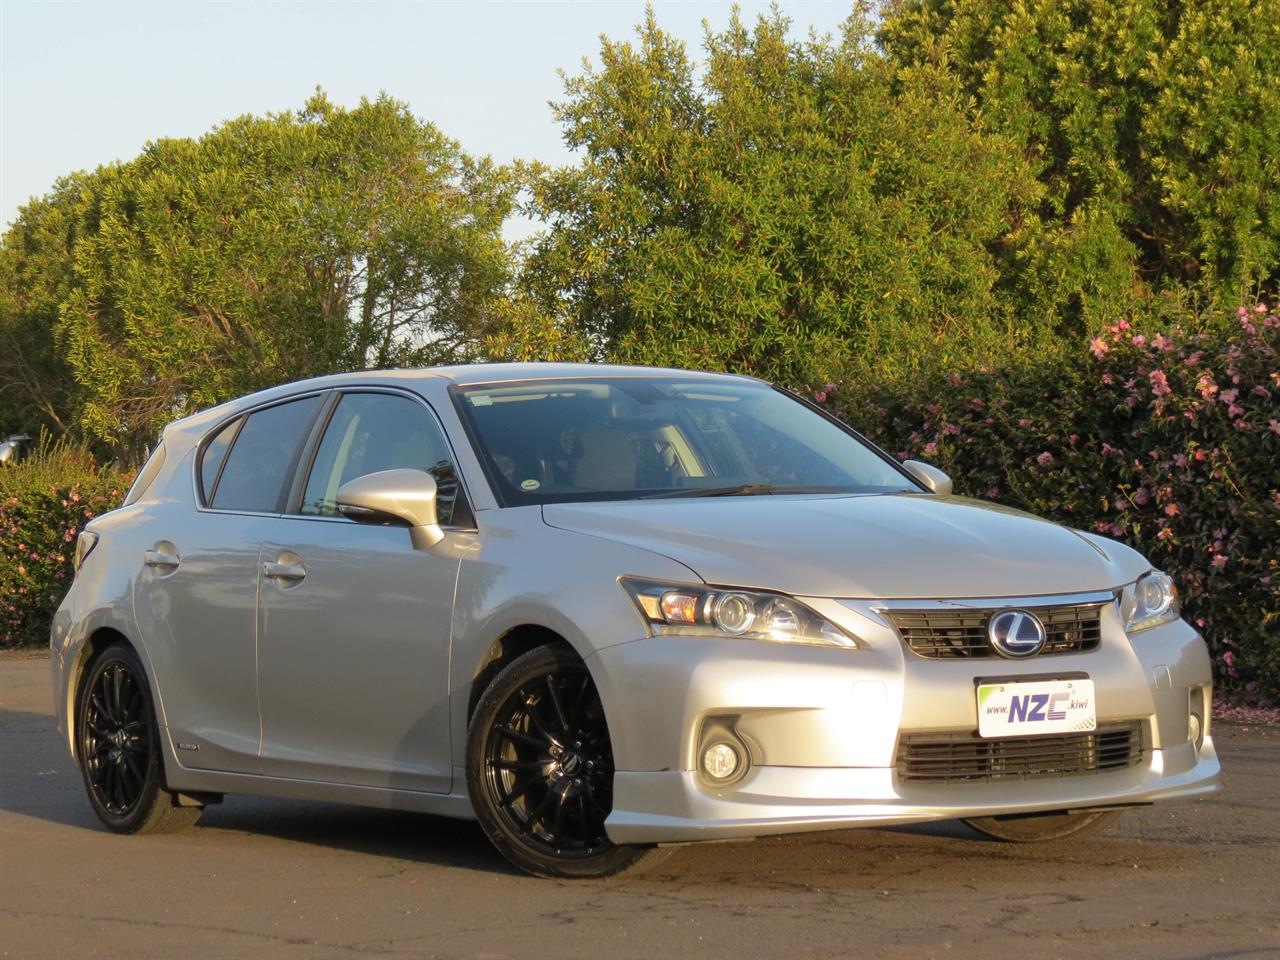 NZC 2012 Lexus CT 200h just arrived to Auckland